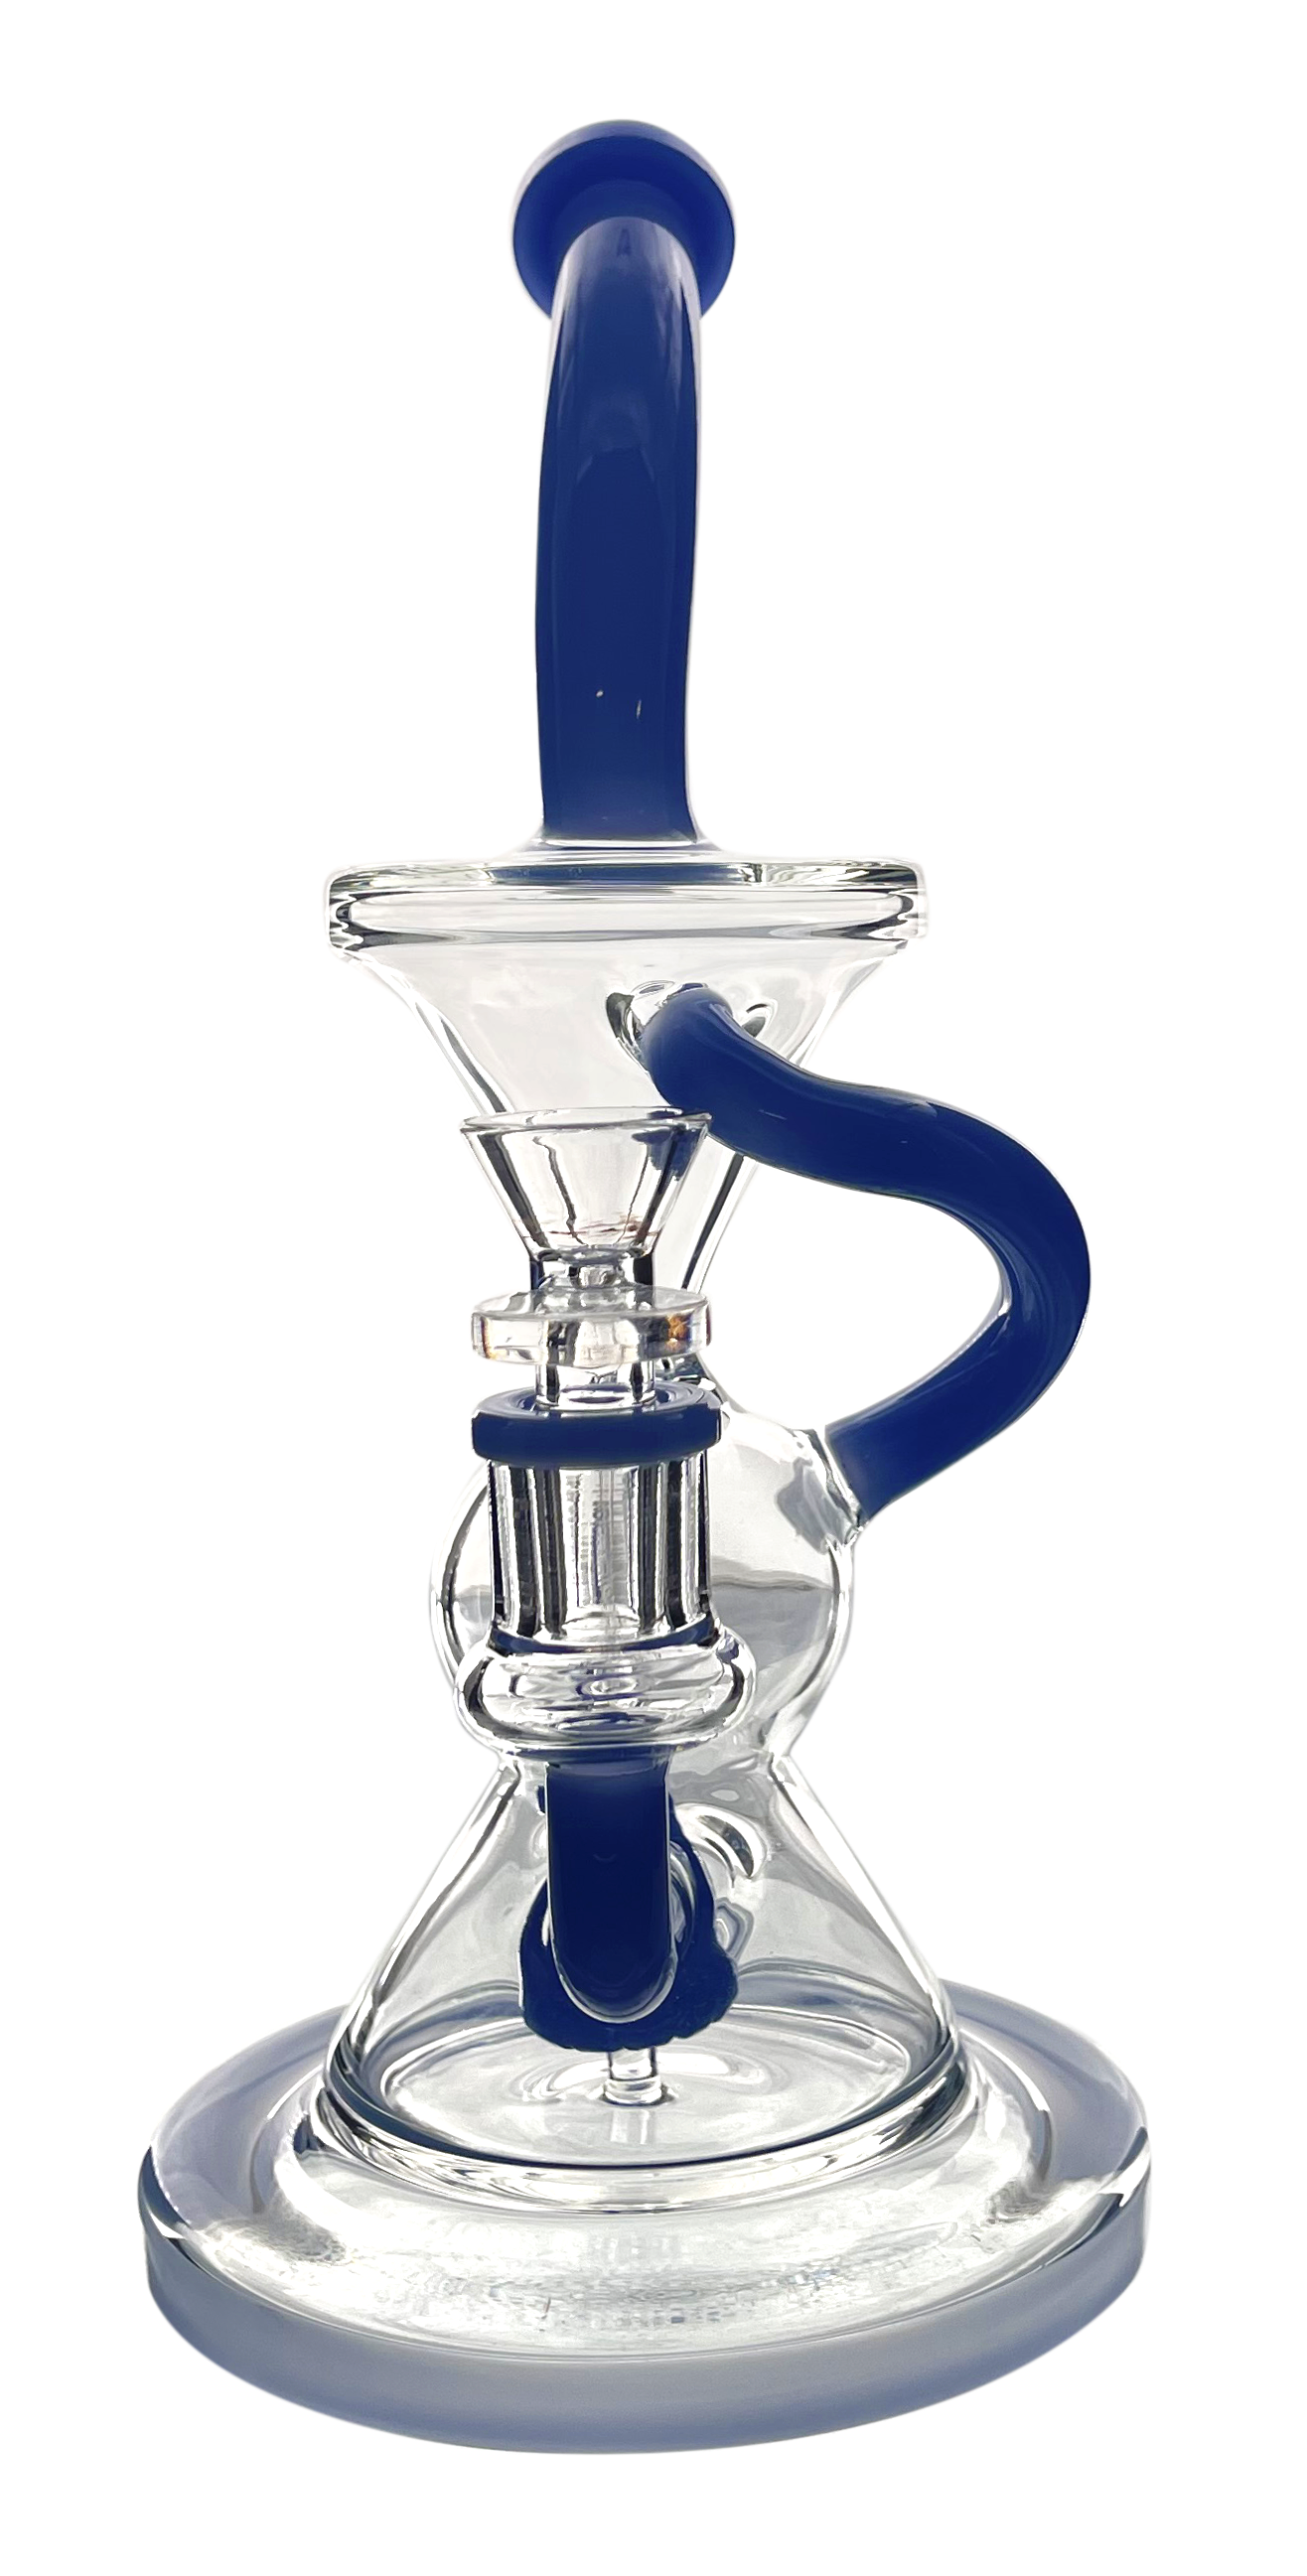 2 ARM RECYCLER WITH COLOR TUBE BEND MOUTHPIECE WITH SHOWERHEAD PERC - Limitless Puff